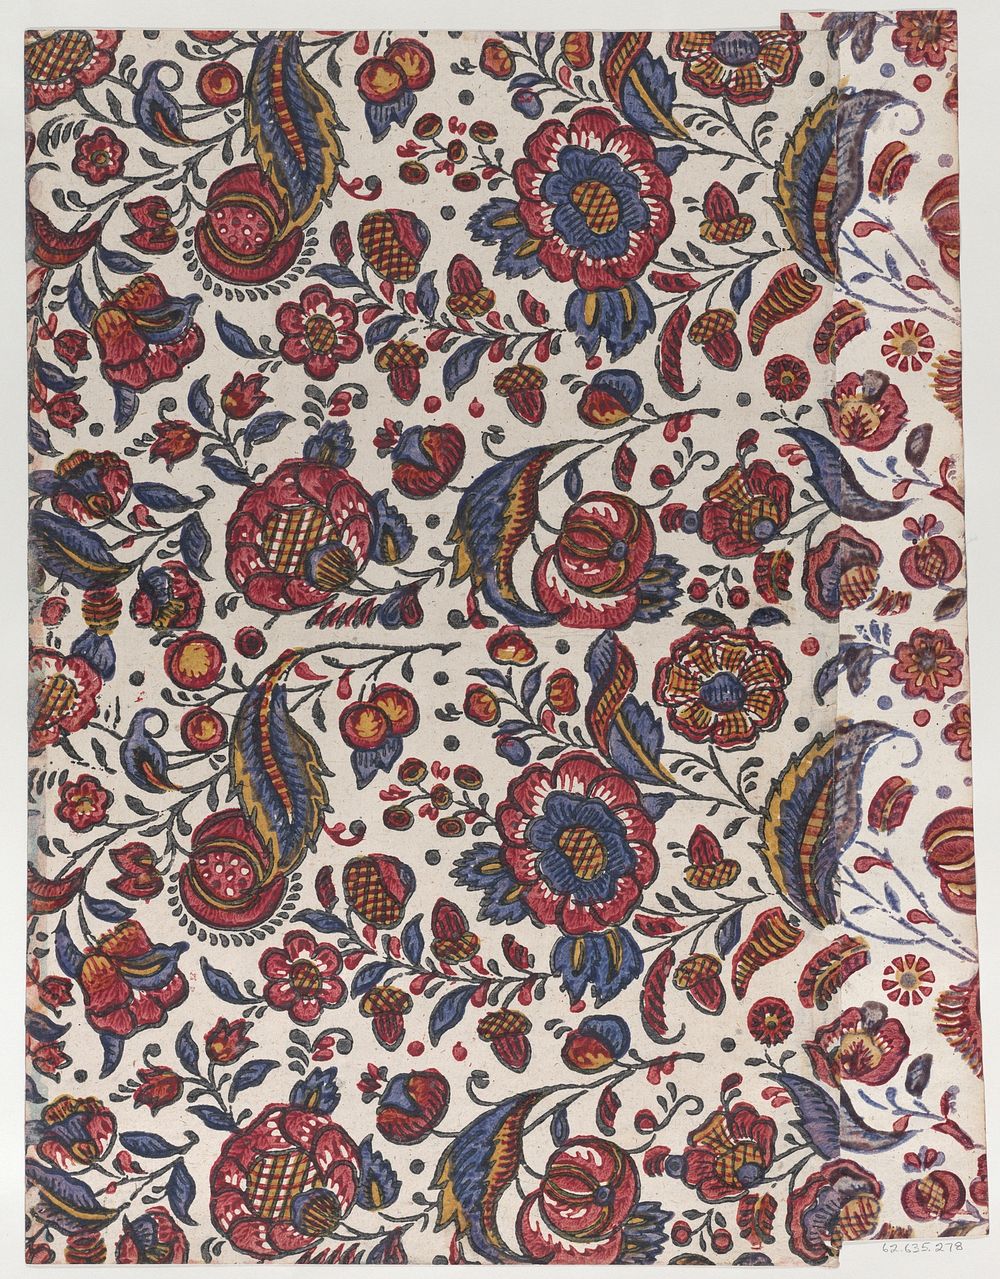 Paste paper with overall pattern of red, blue, and yellow flowers